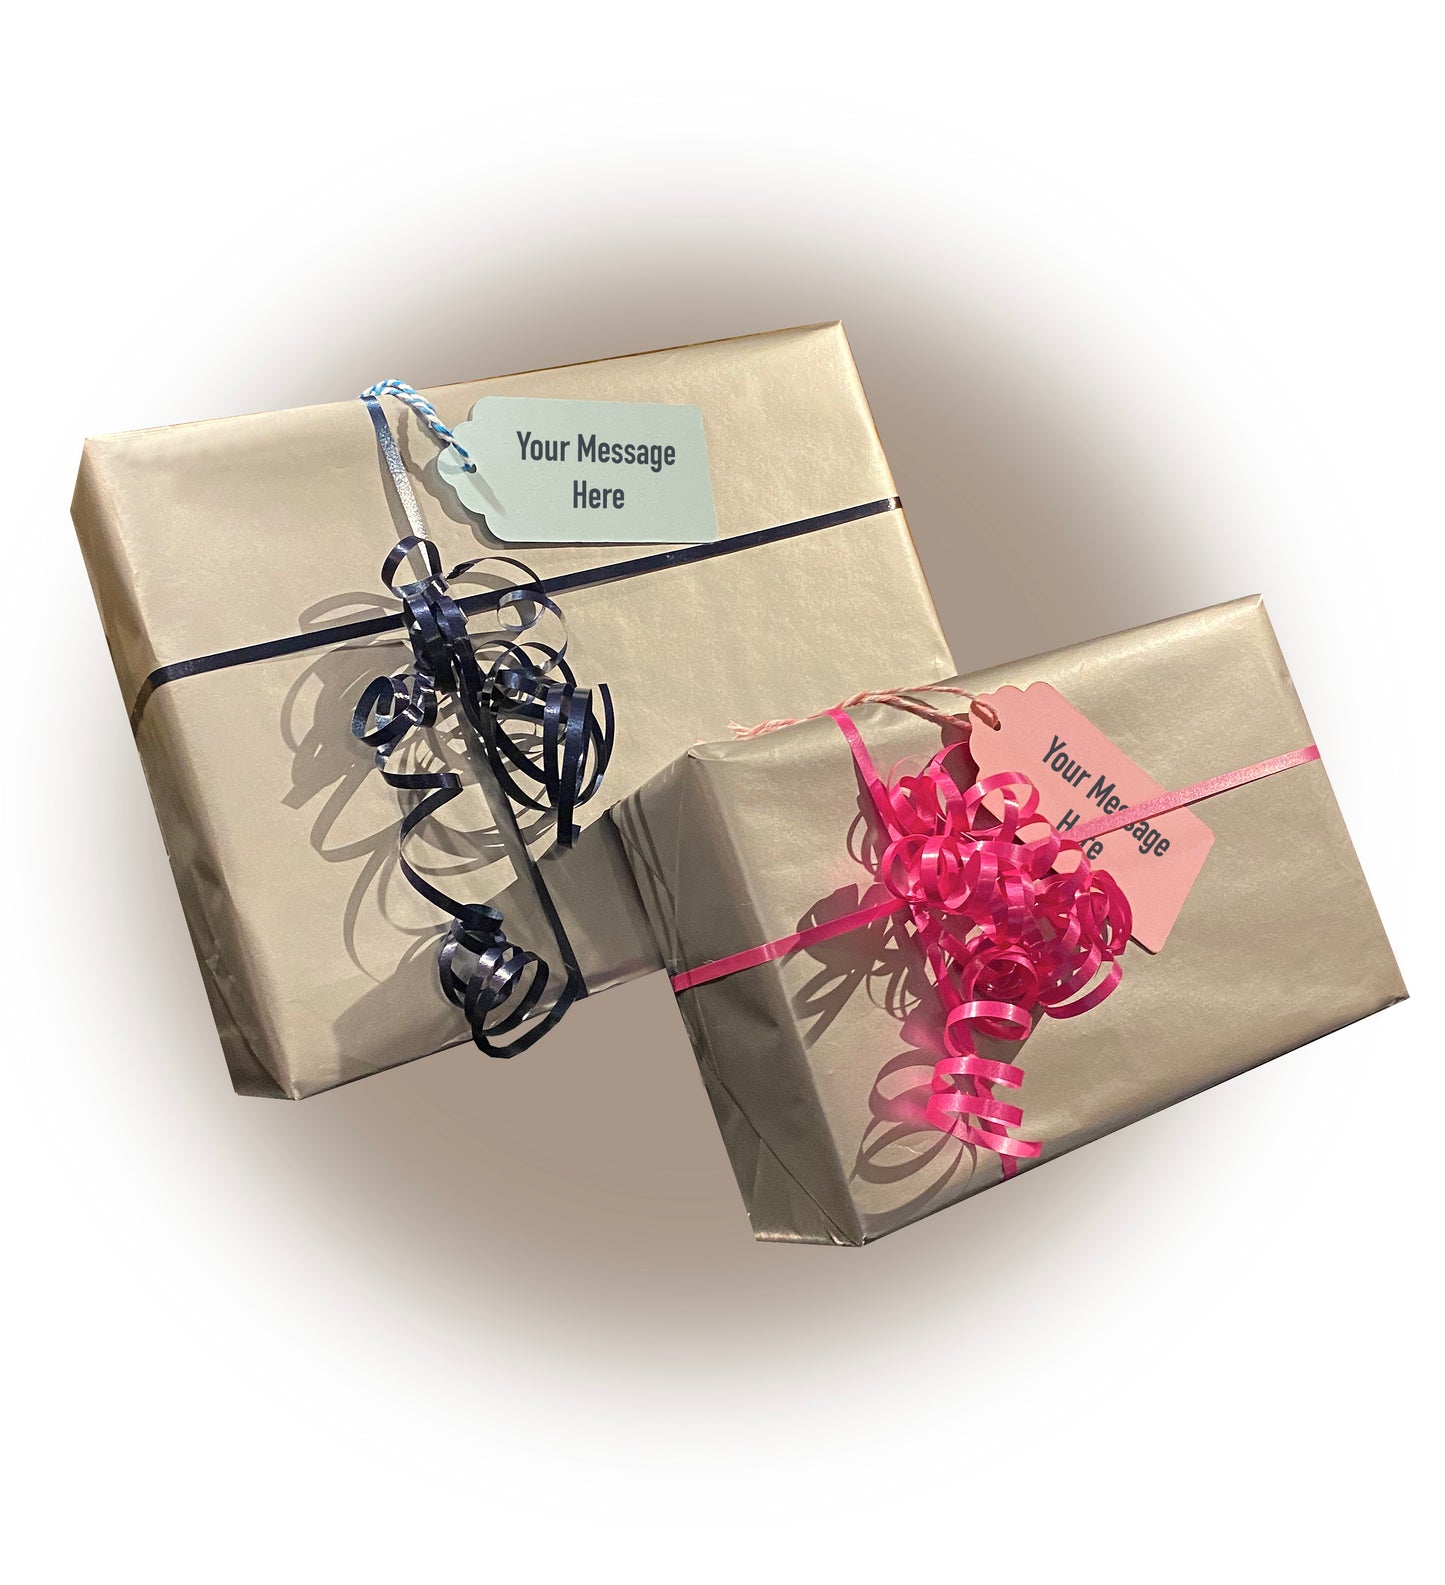 picture of Puffed Treat Variety Box gift wrapped